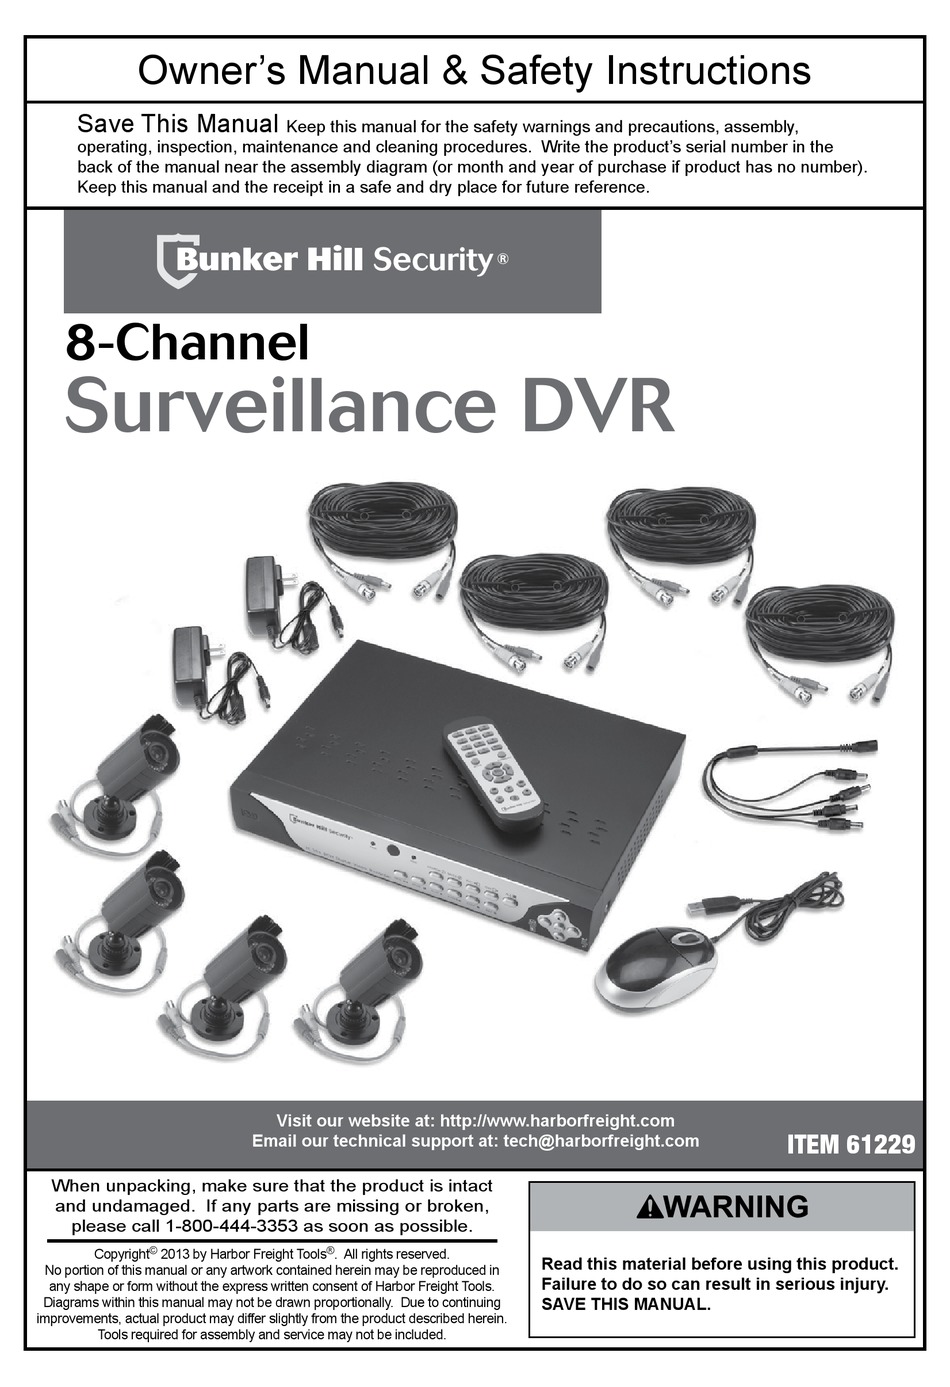 bunker hill security dvr 61229 troubleshooting device id error